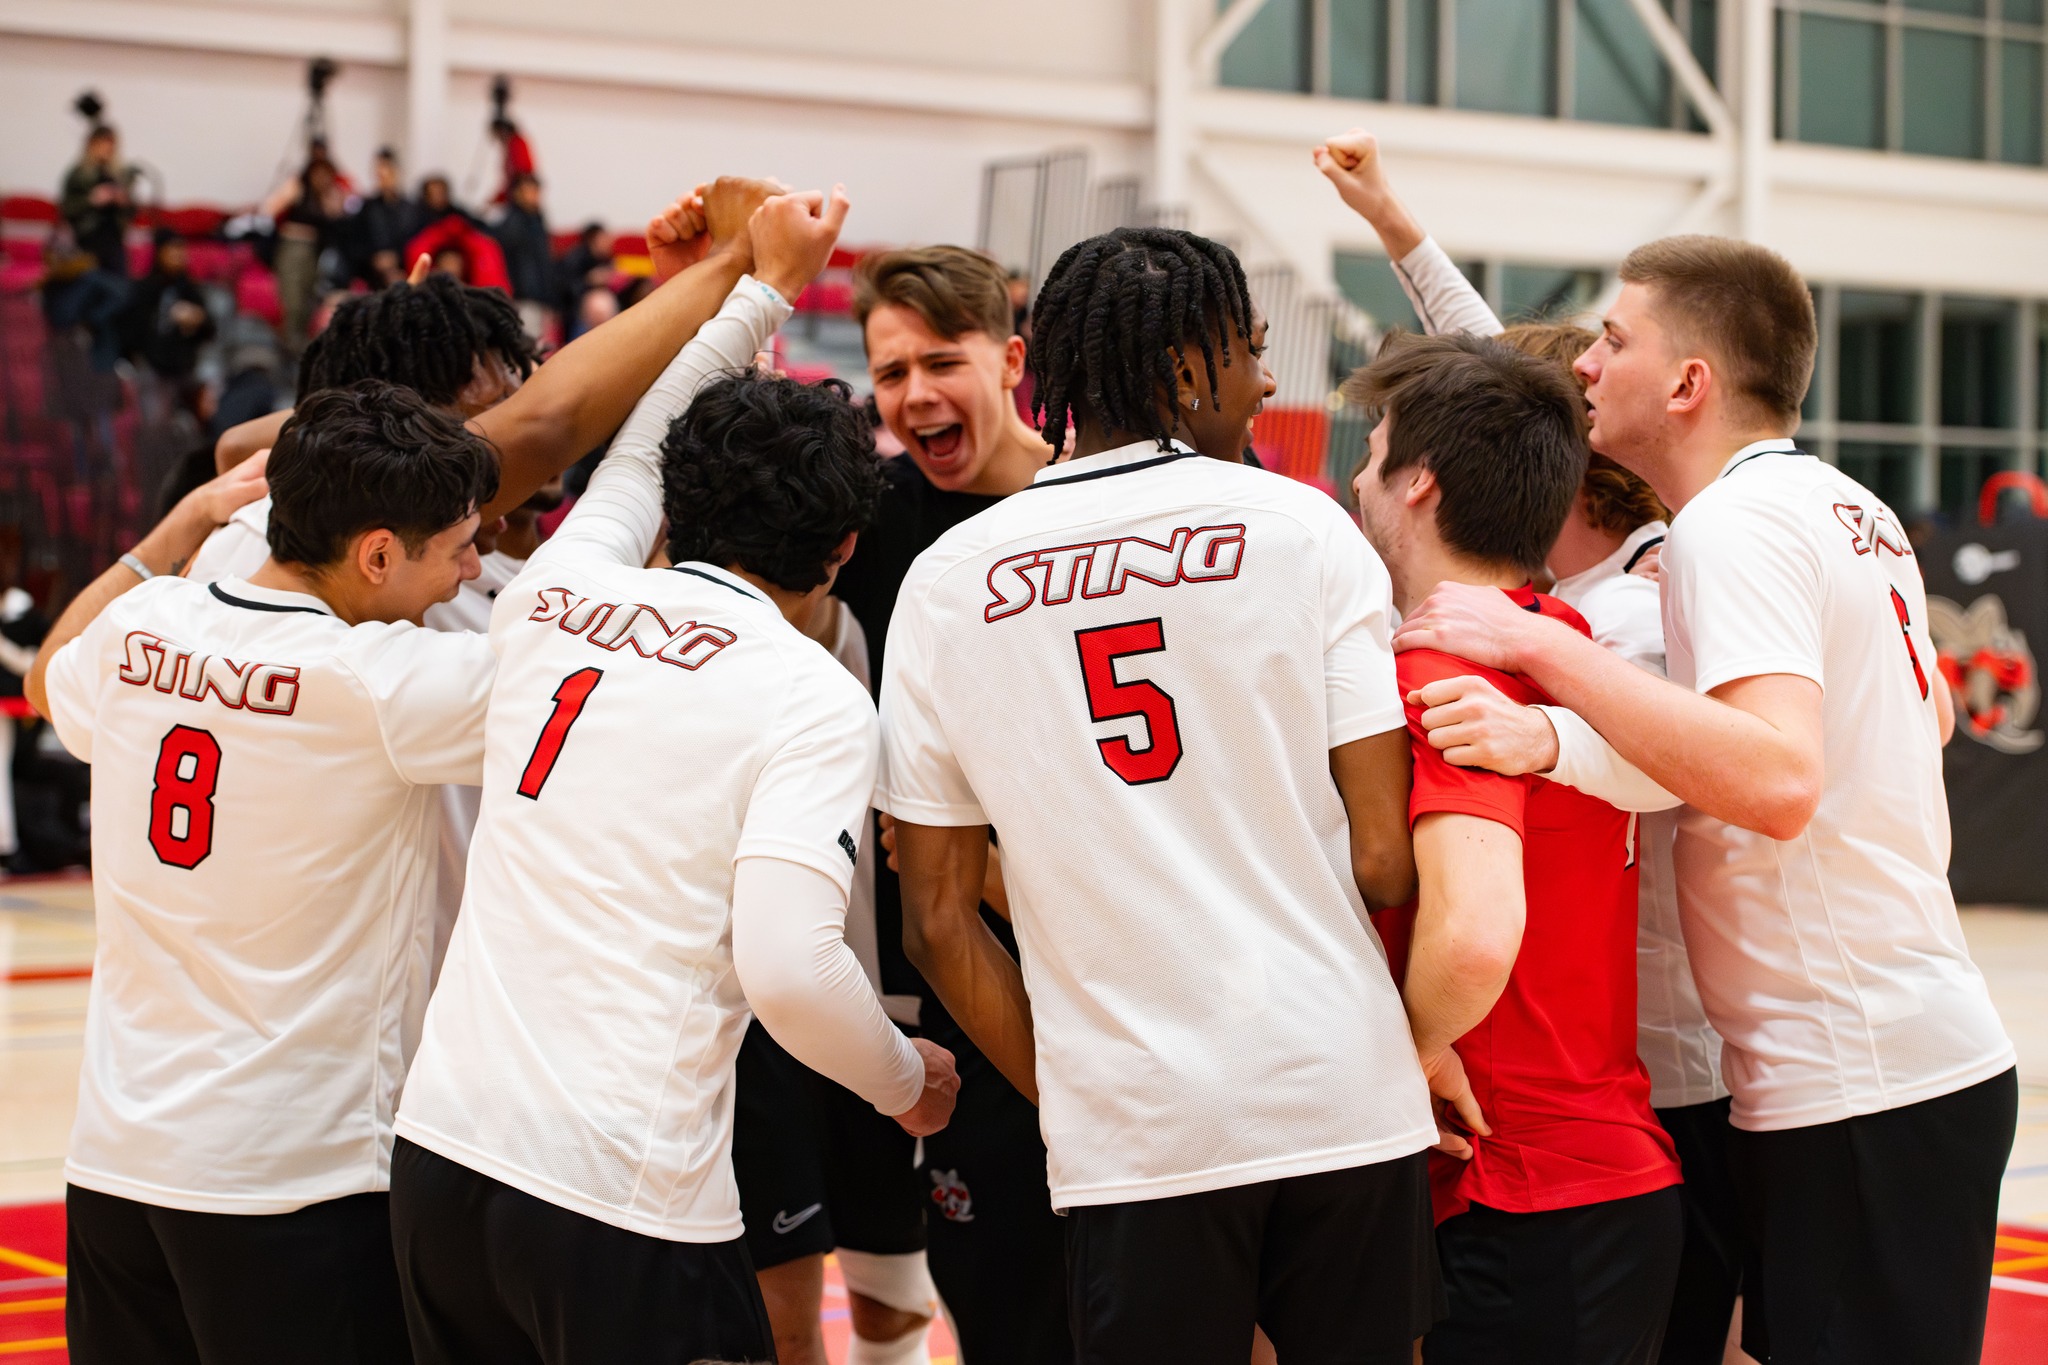 Men's Volleyball are off to Playoffs